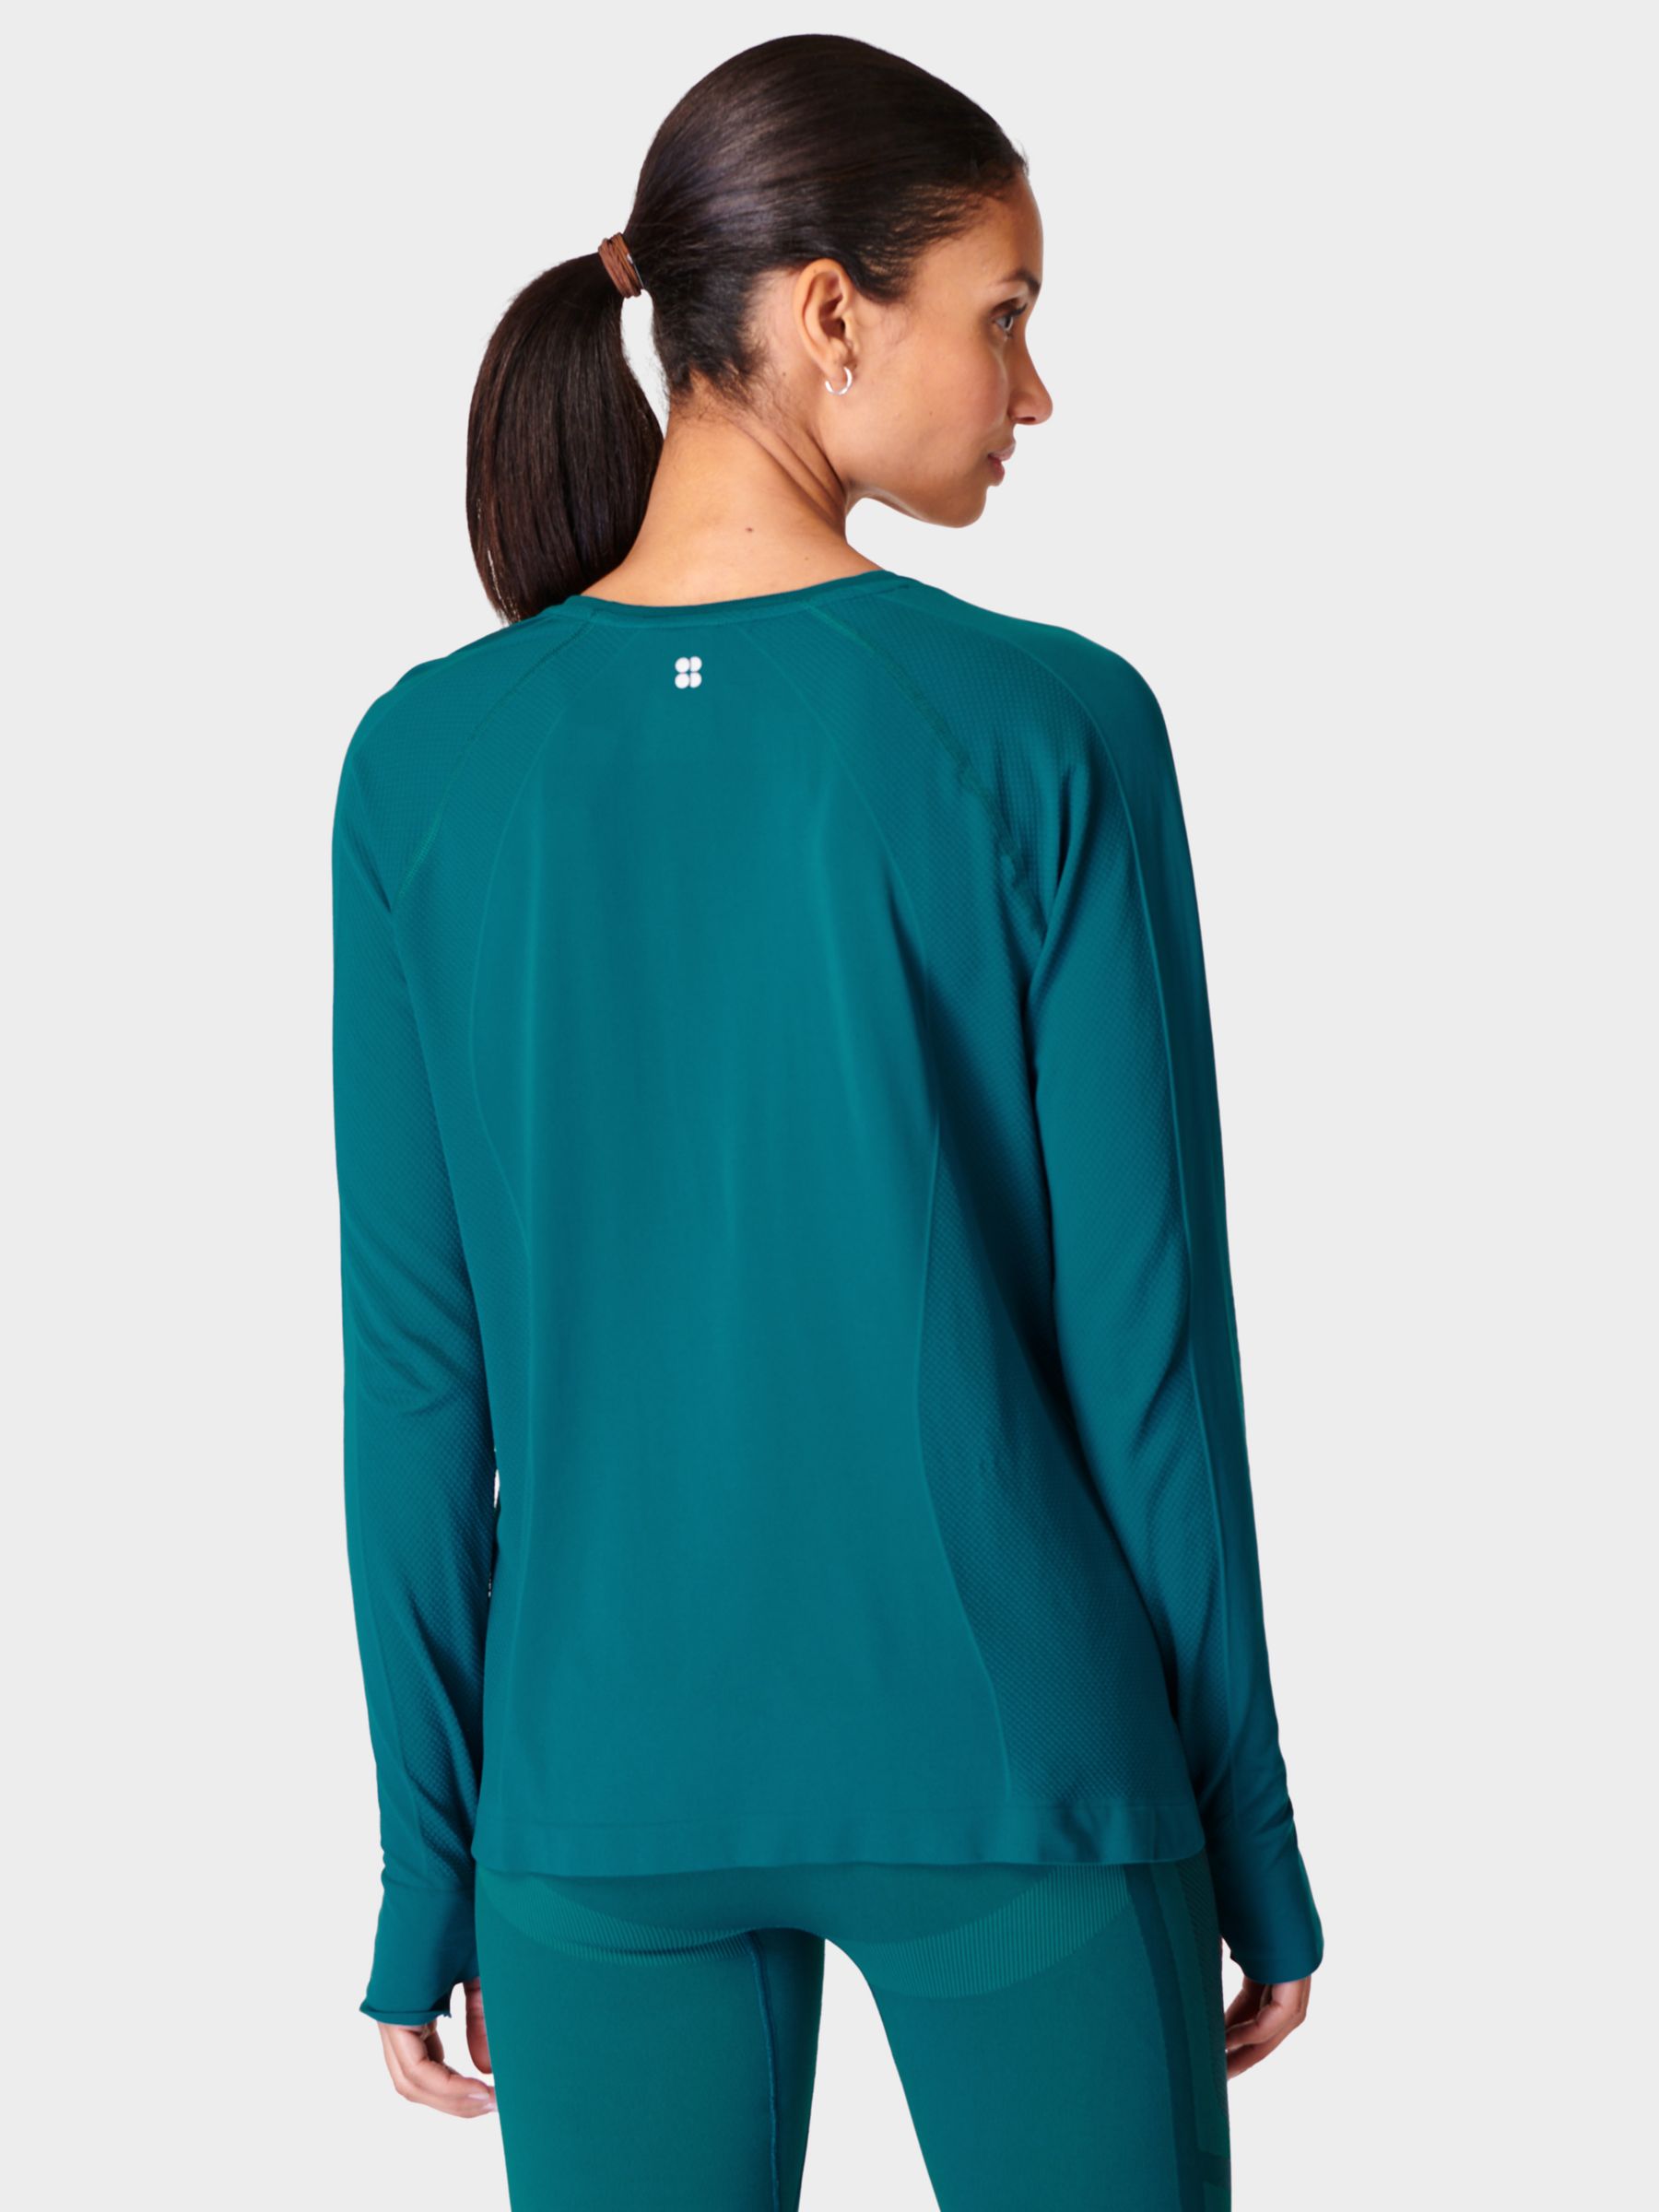 Sweaty Betty Athlete Seamless Featherweight Long Sleeve Top, Reef Teal Blue, XS-S